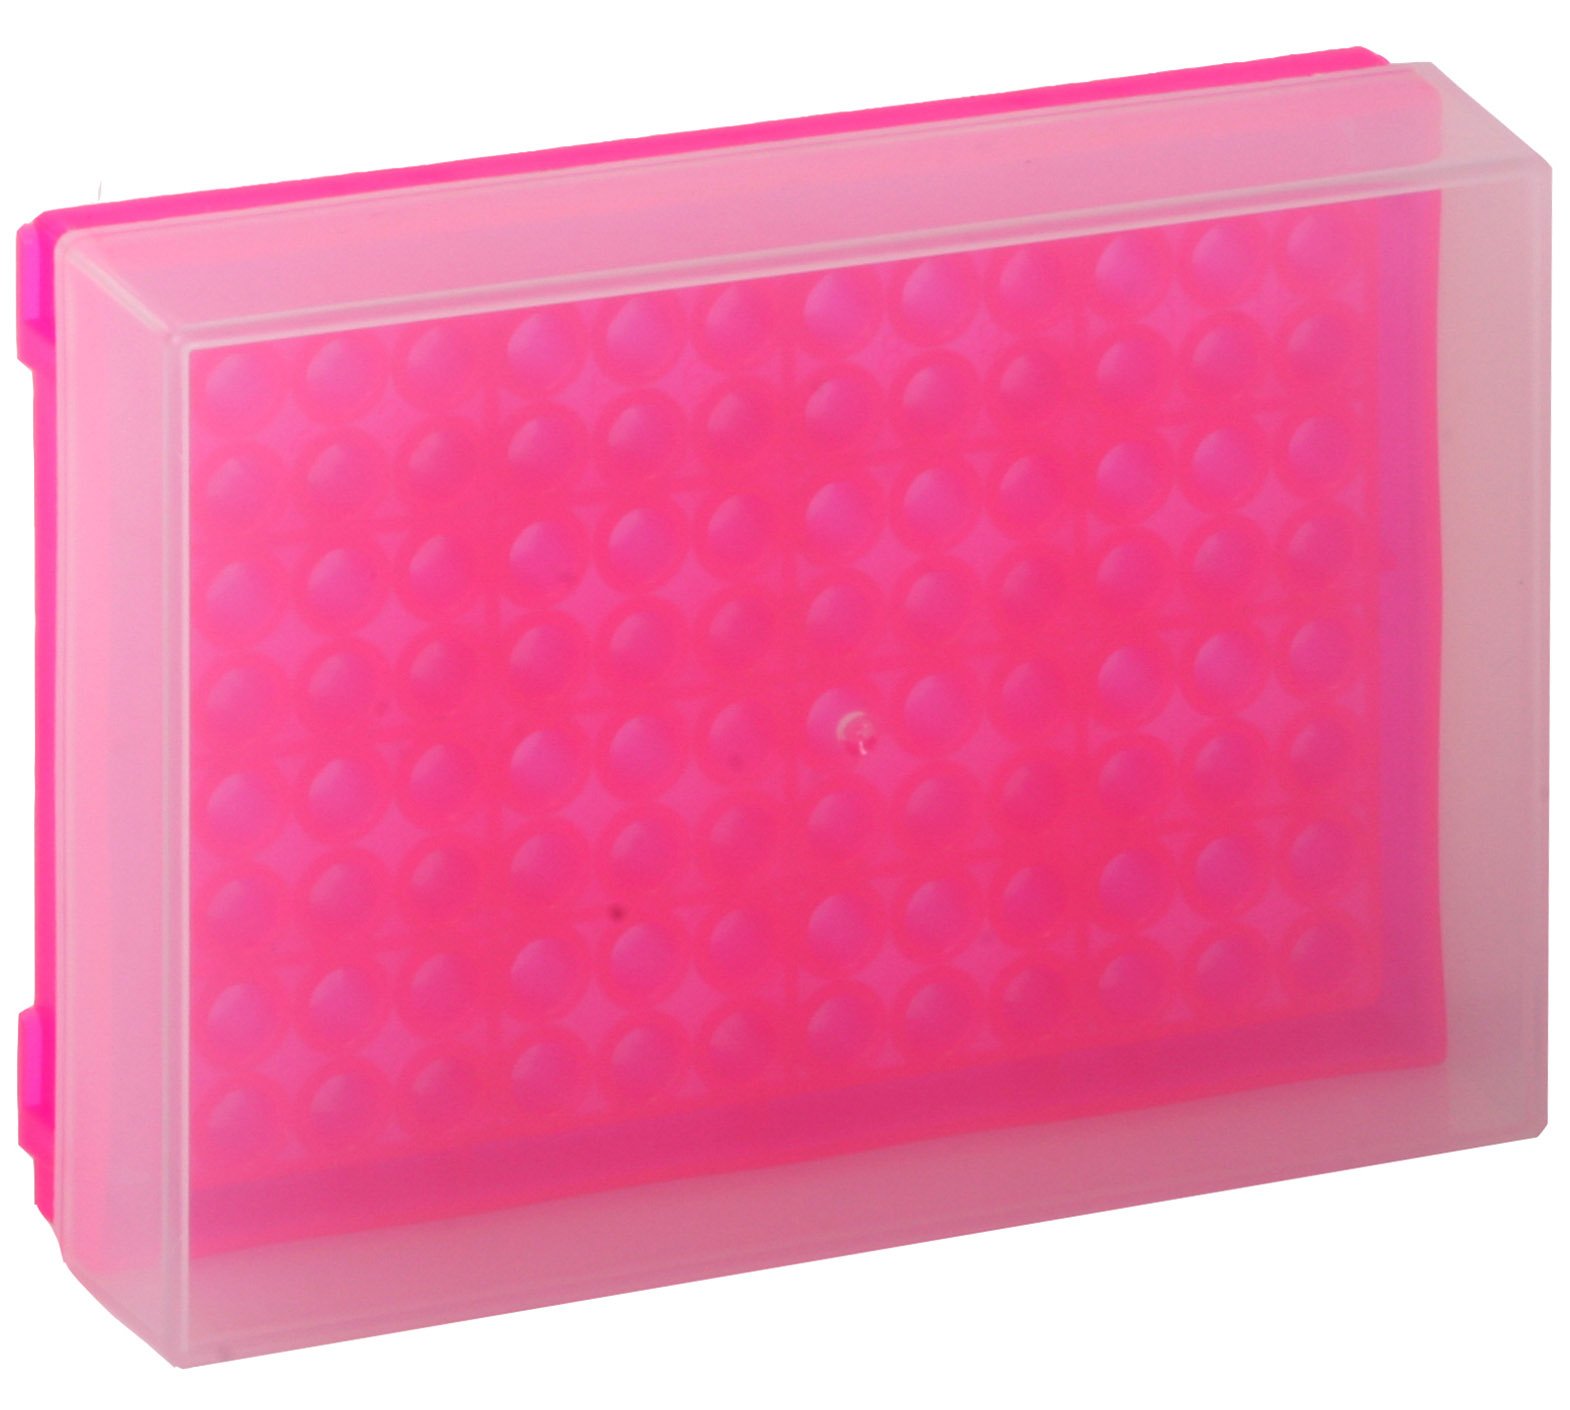 96-Well Preparation Rack with Cover - Fluorescent Pink